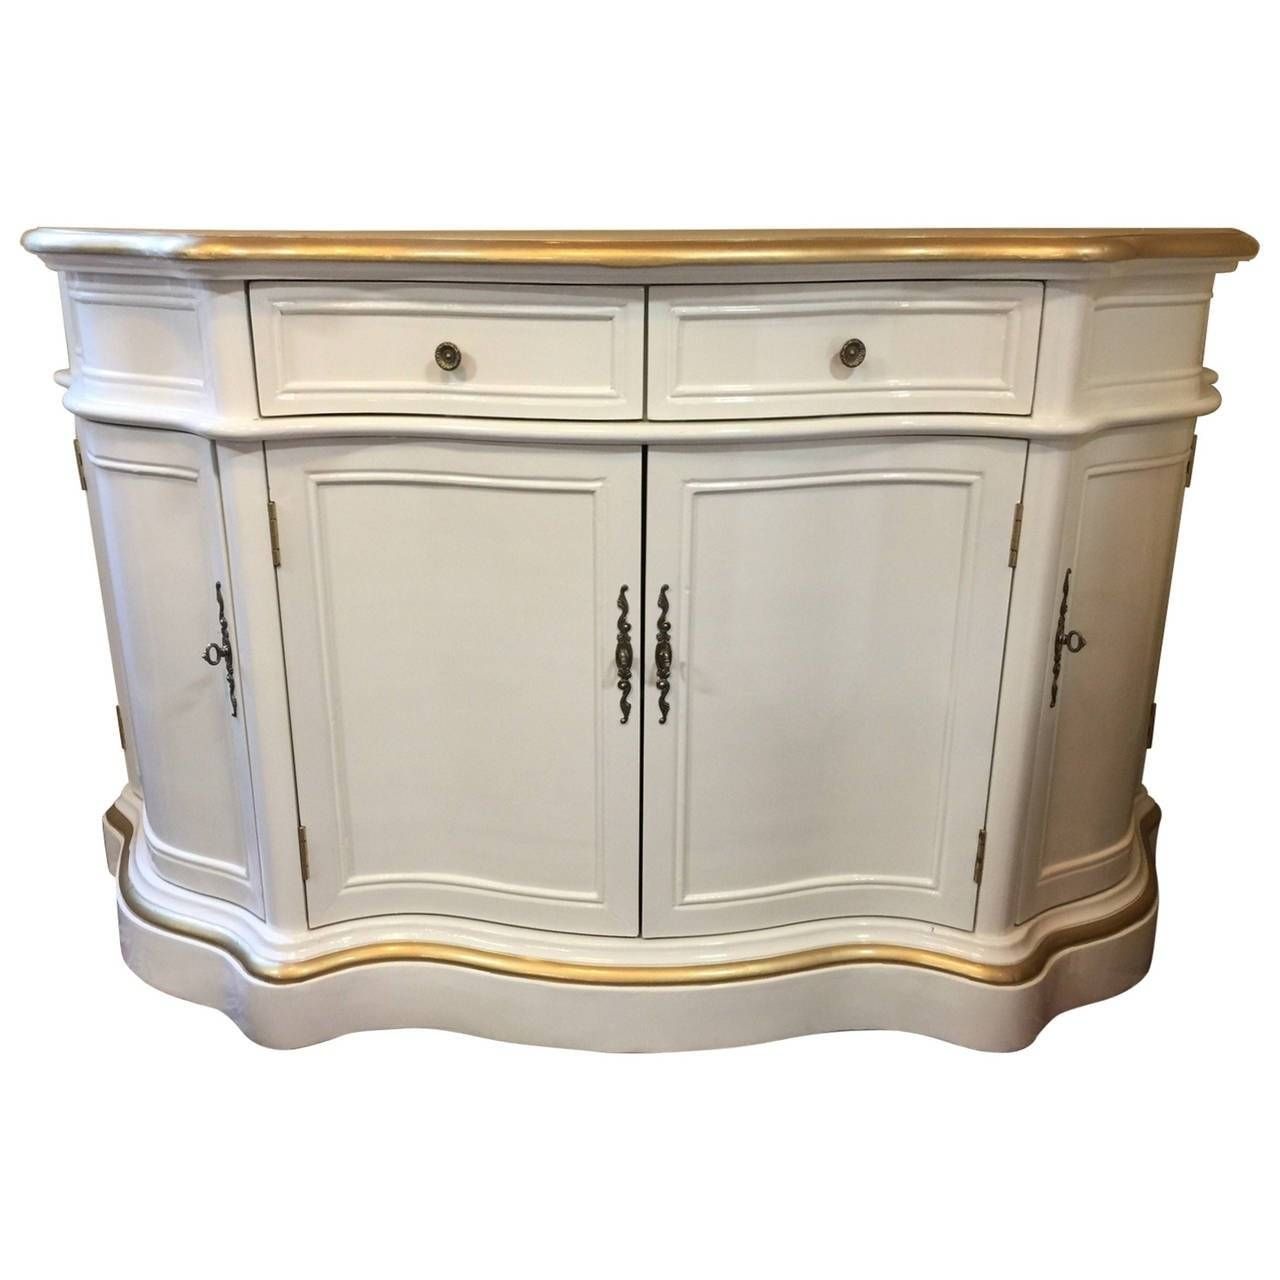 Curvy Lacquered Sideboard In Cream And Gold At 1stdibs In Cream Kitchen Sideboards (Photo 15 of 15)